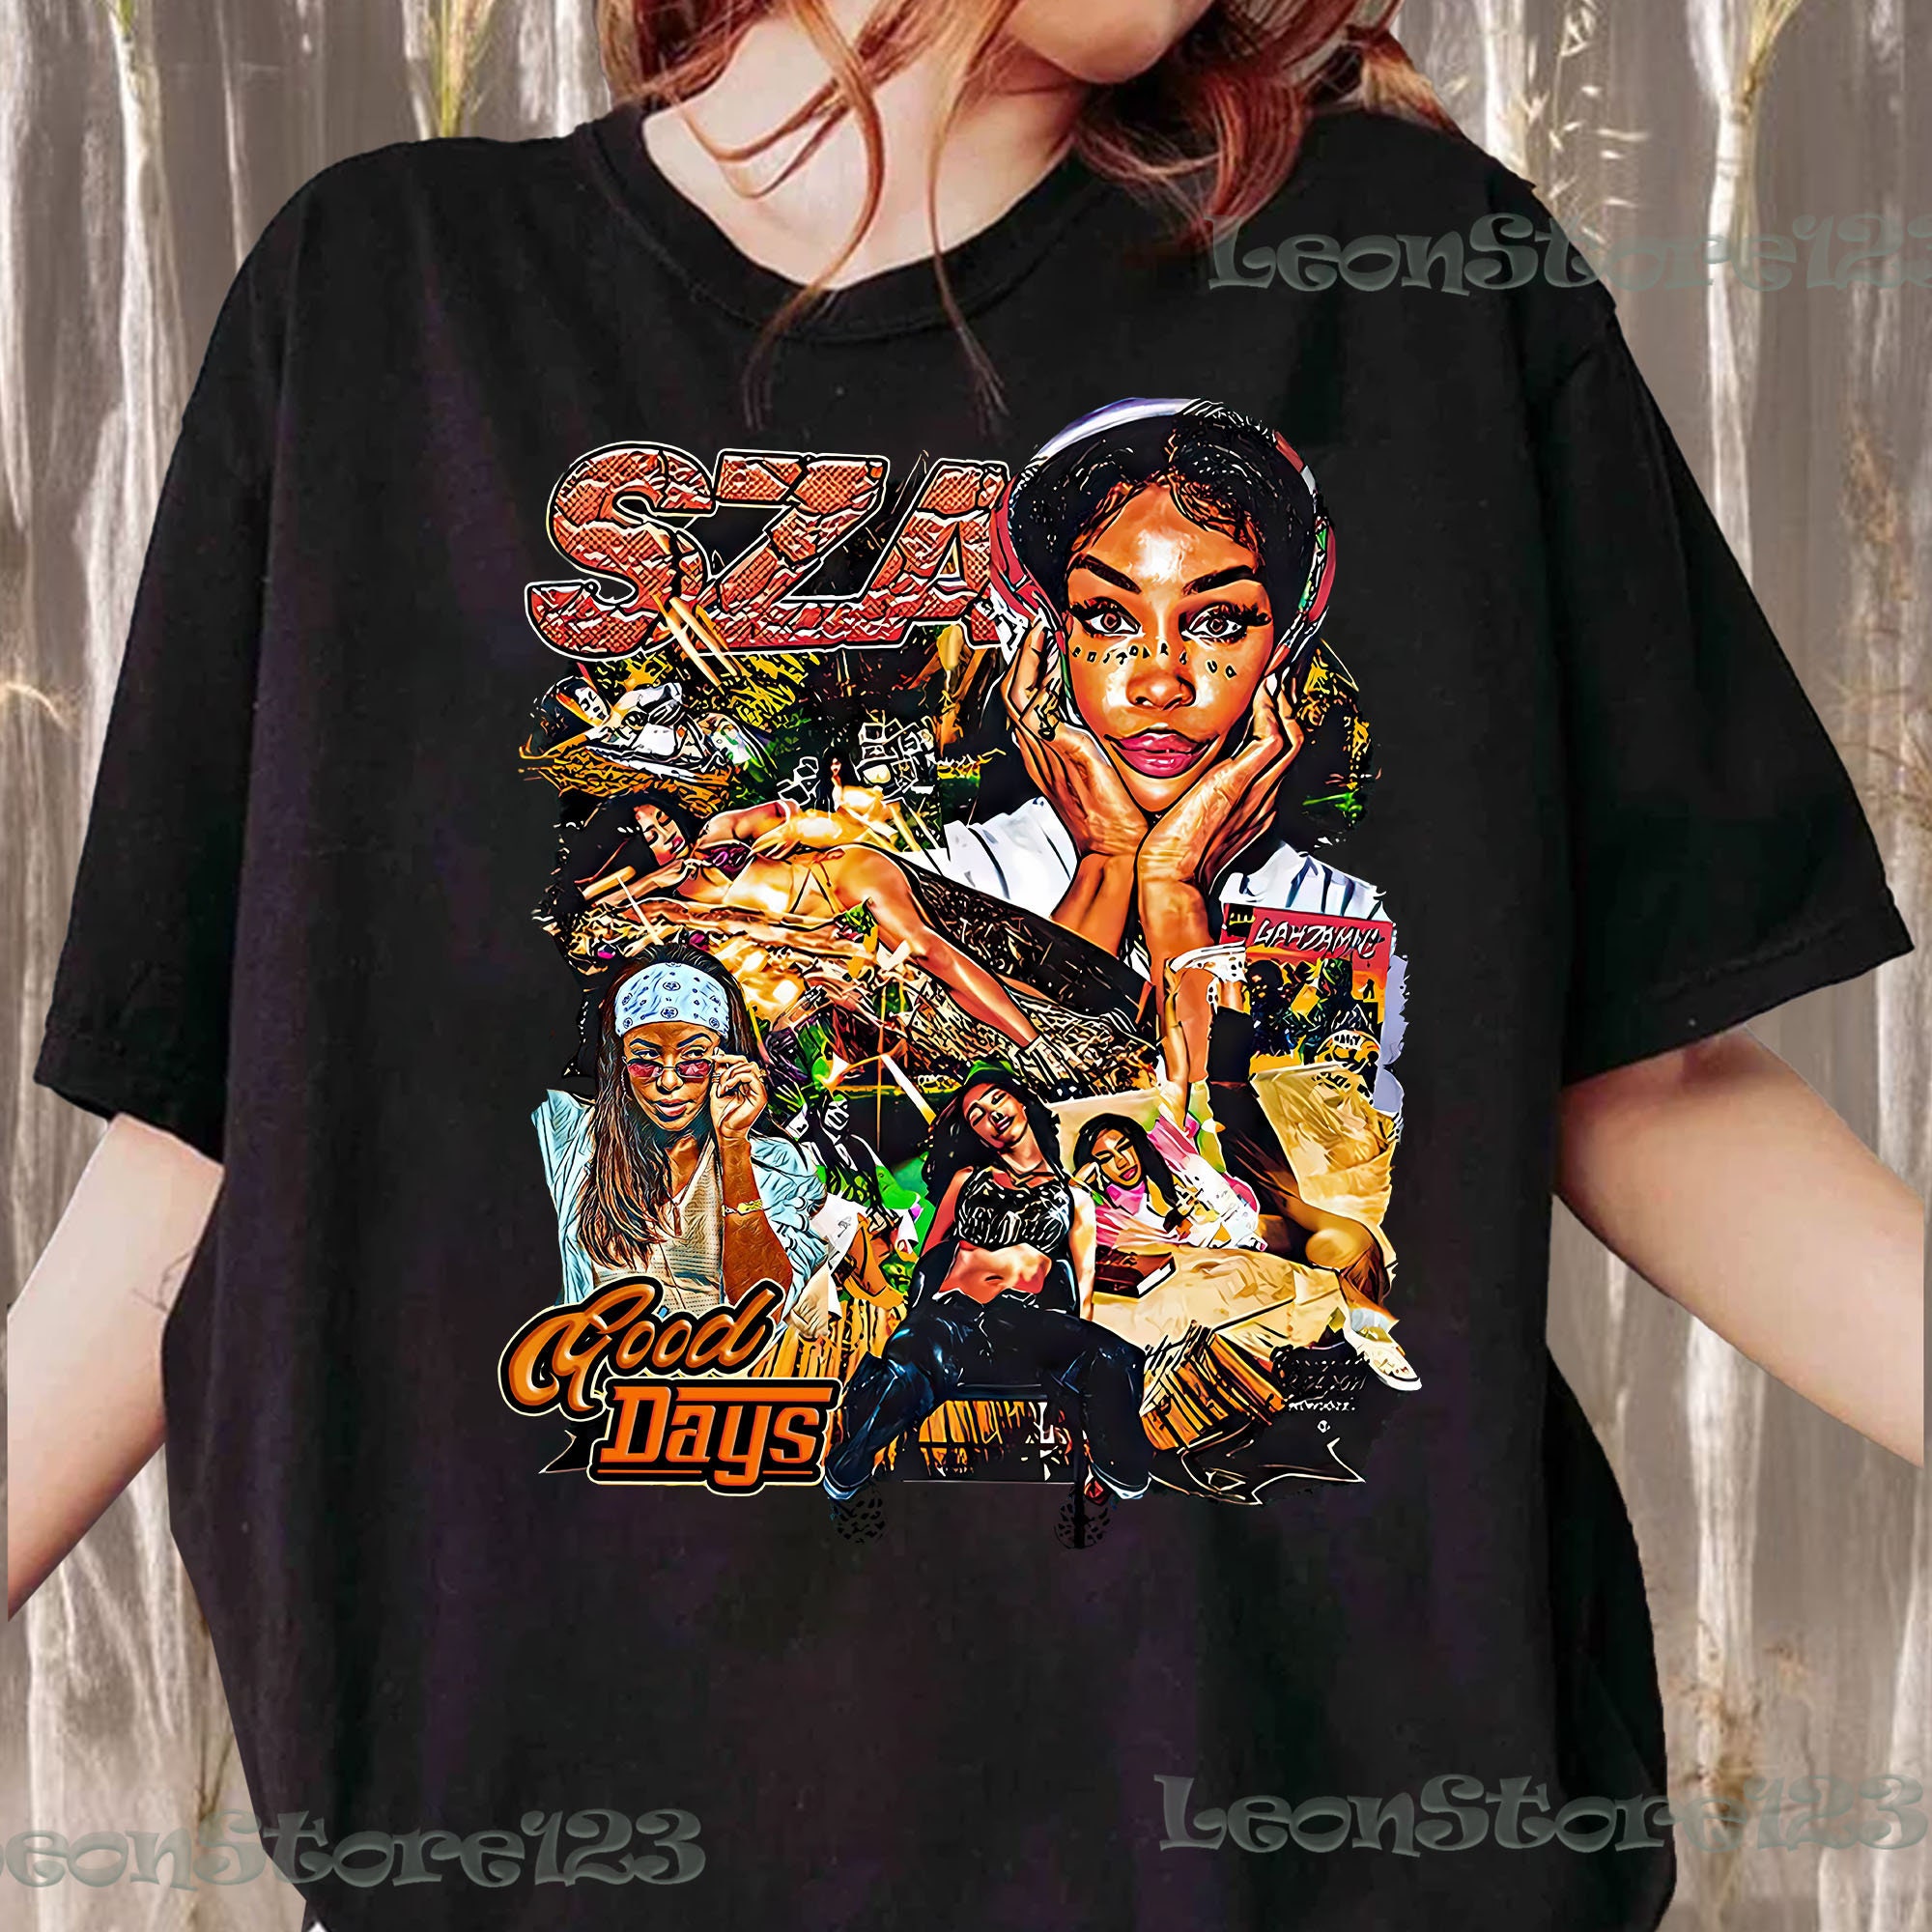 Vintage 90s Graphic Style SZA Good Days T-Shirt